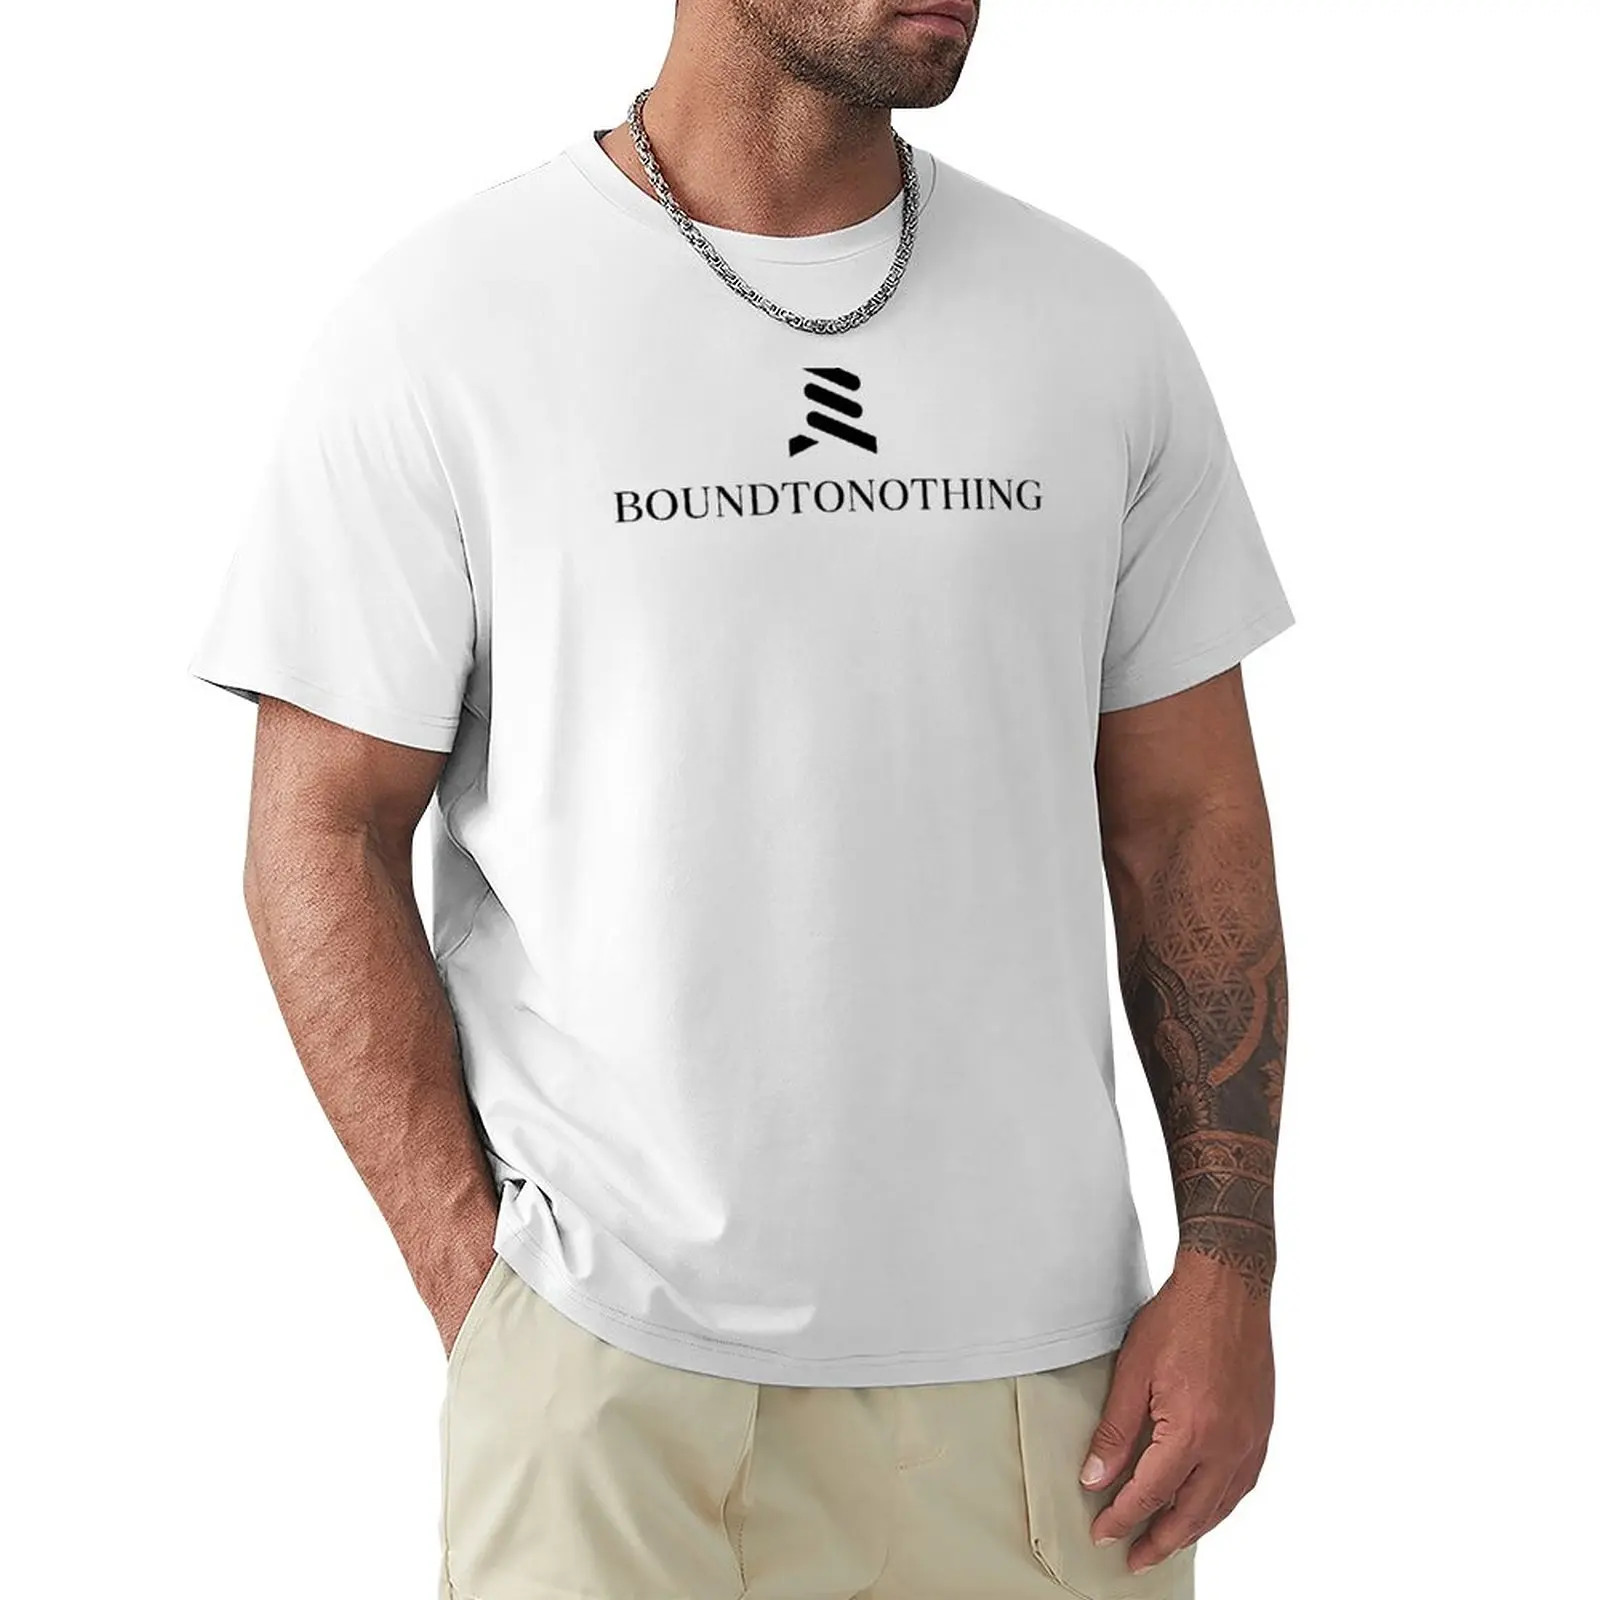 BoundToNothing T-Shirt sublime aesthetic clothes graphics t shirts for men graphic new bbm t shirt cute clothes man clothes custom t shirts design your own hippie clothes t shirts for men